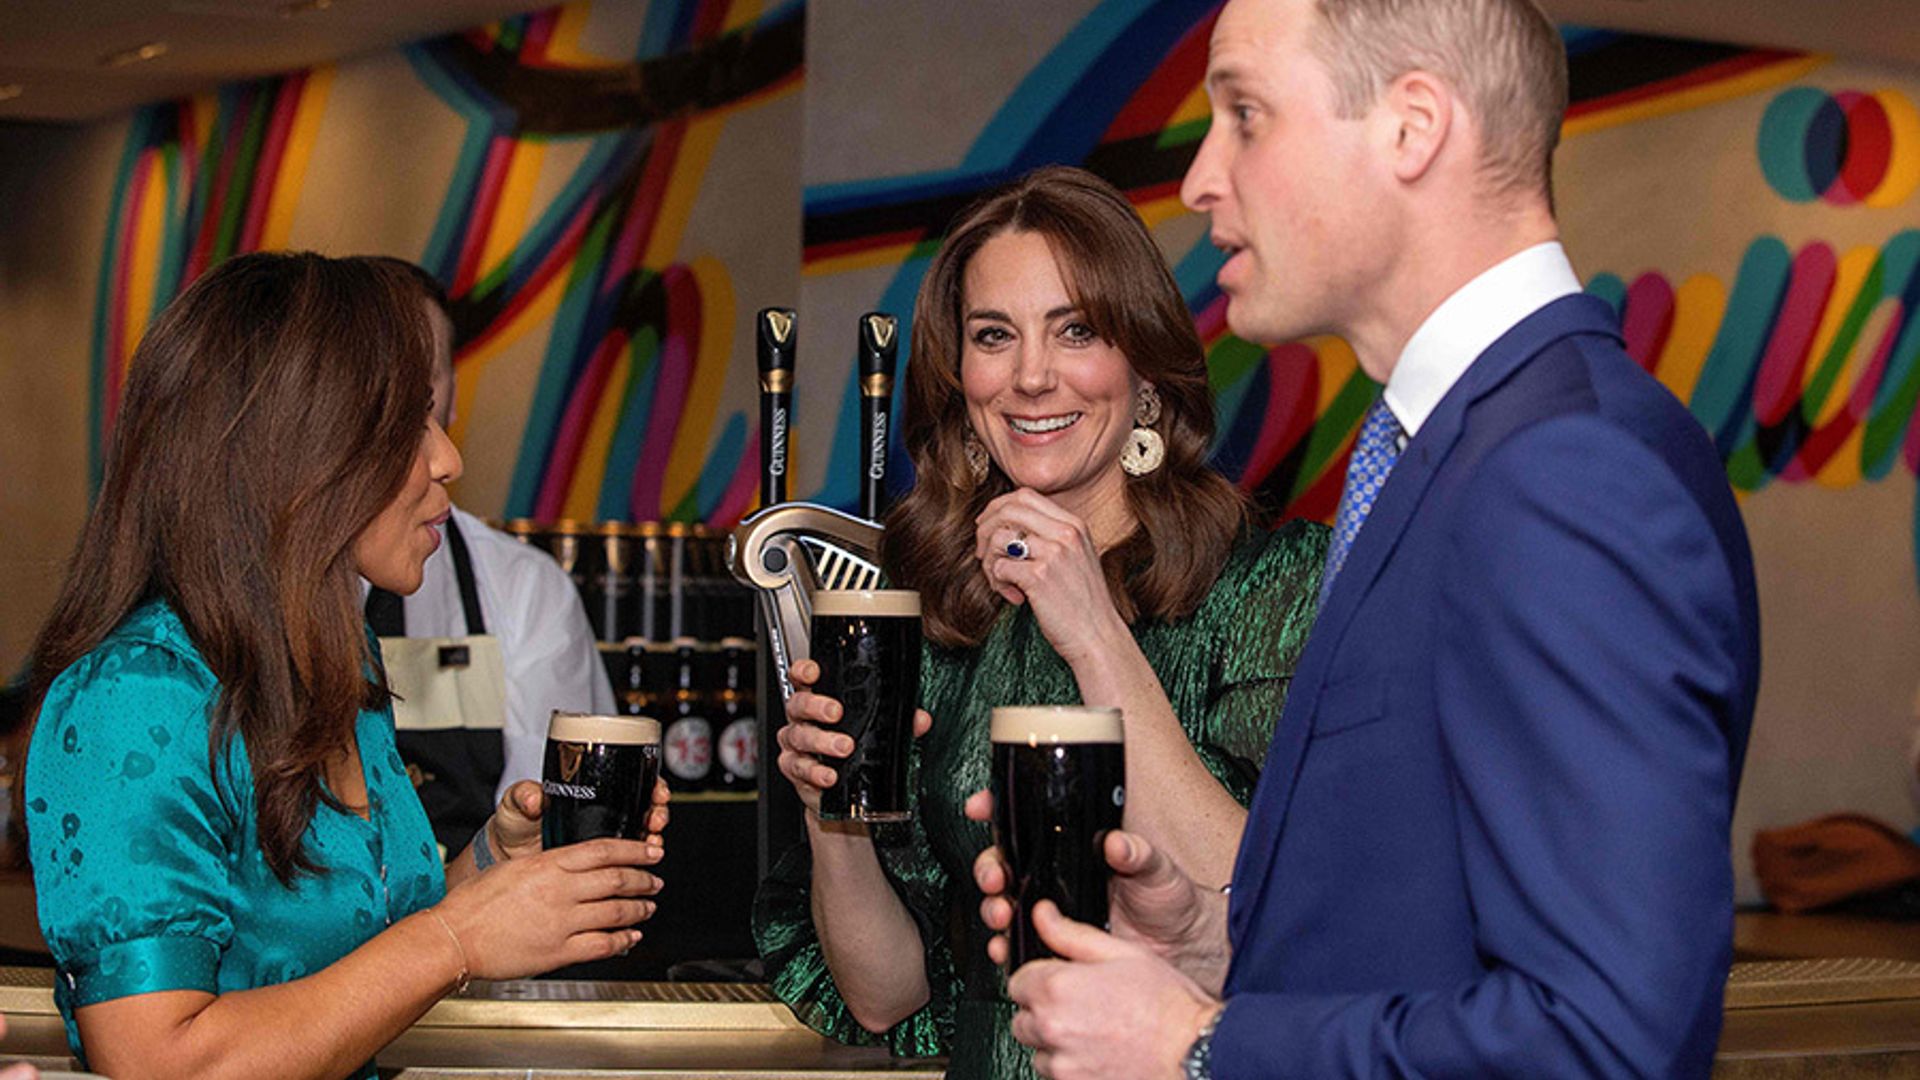 All the best photos from Duchess Kate and Prince William's 2020 royal tour of Ireland